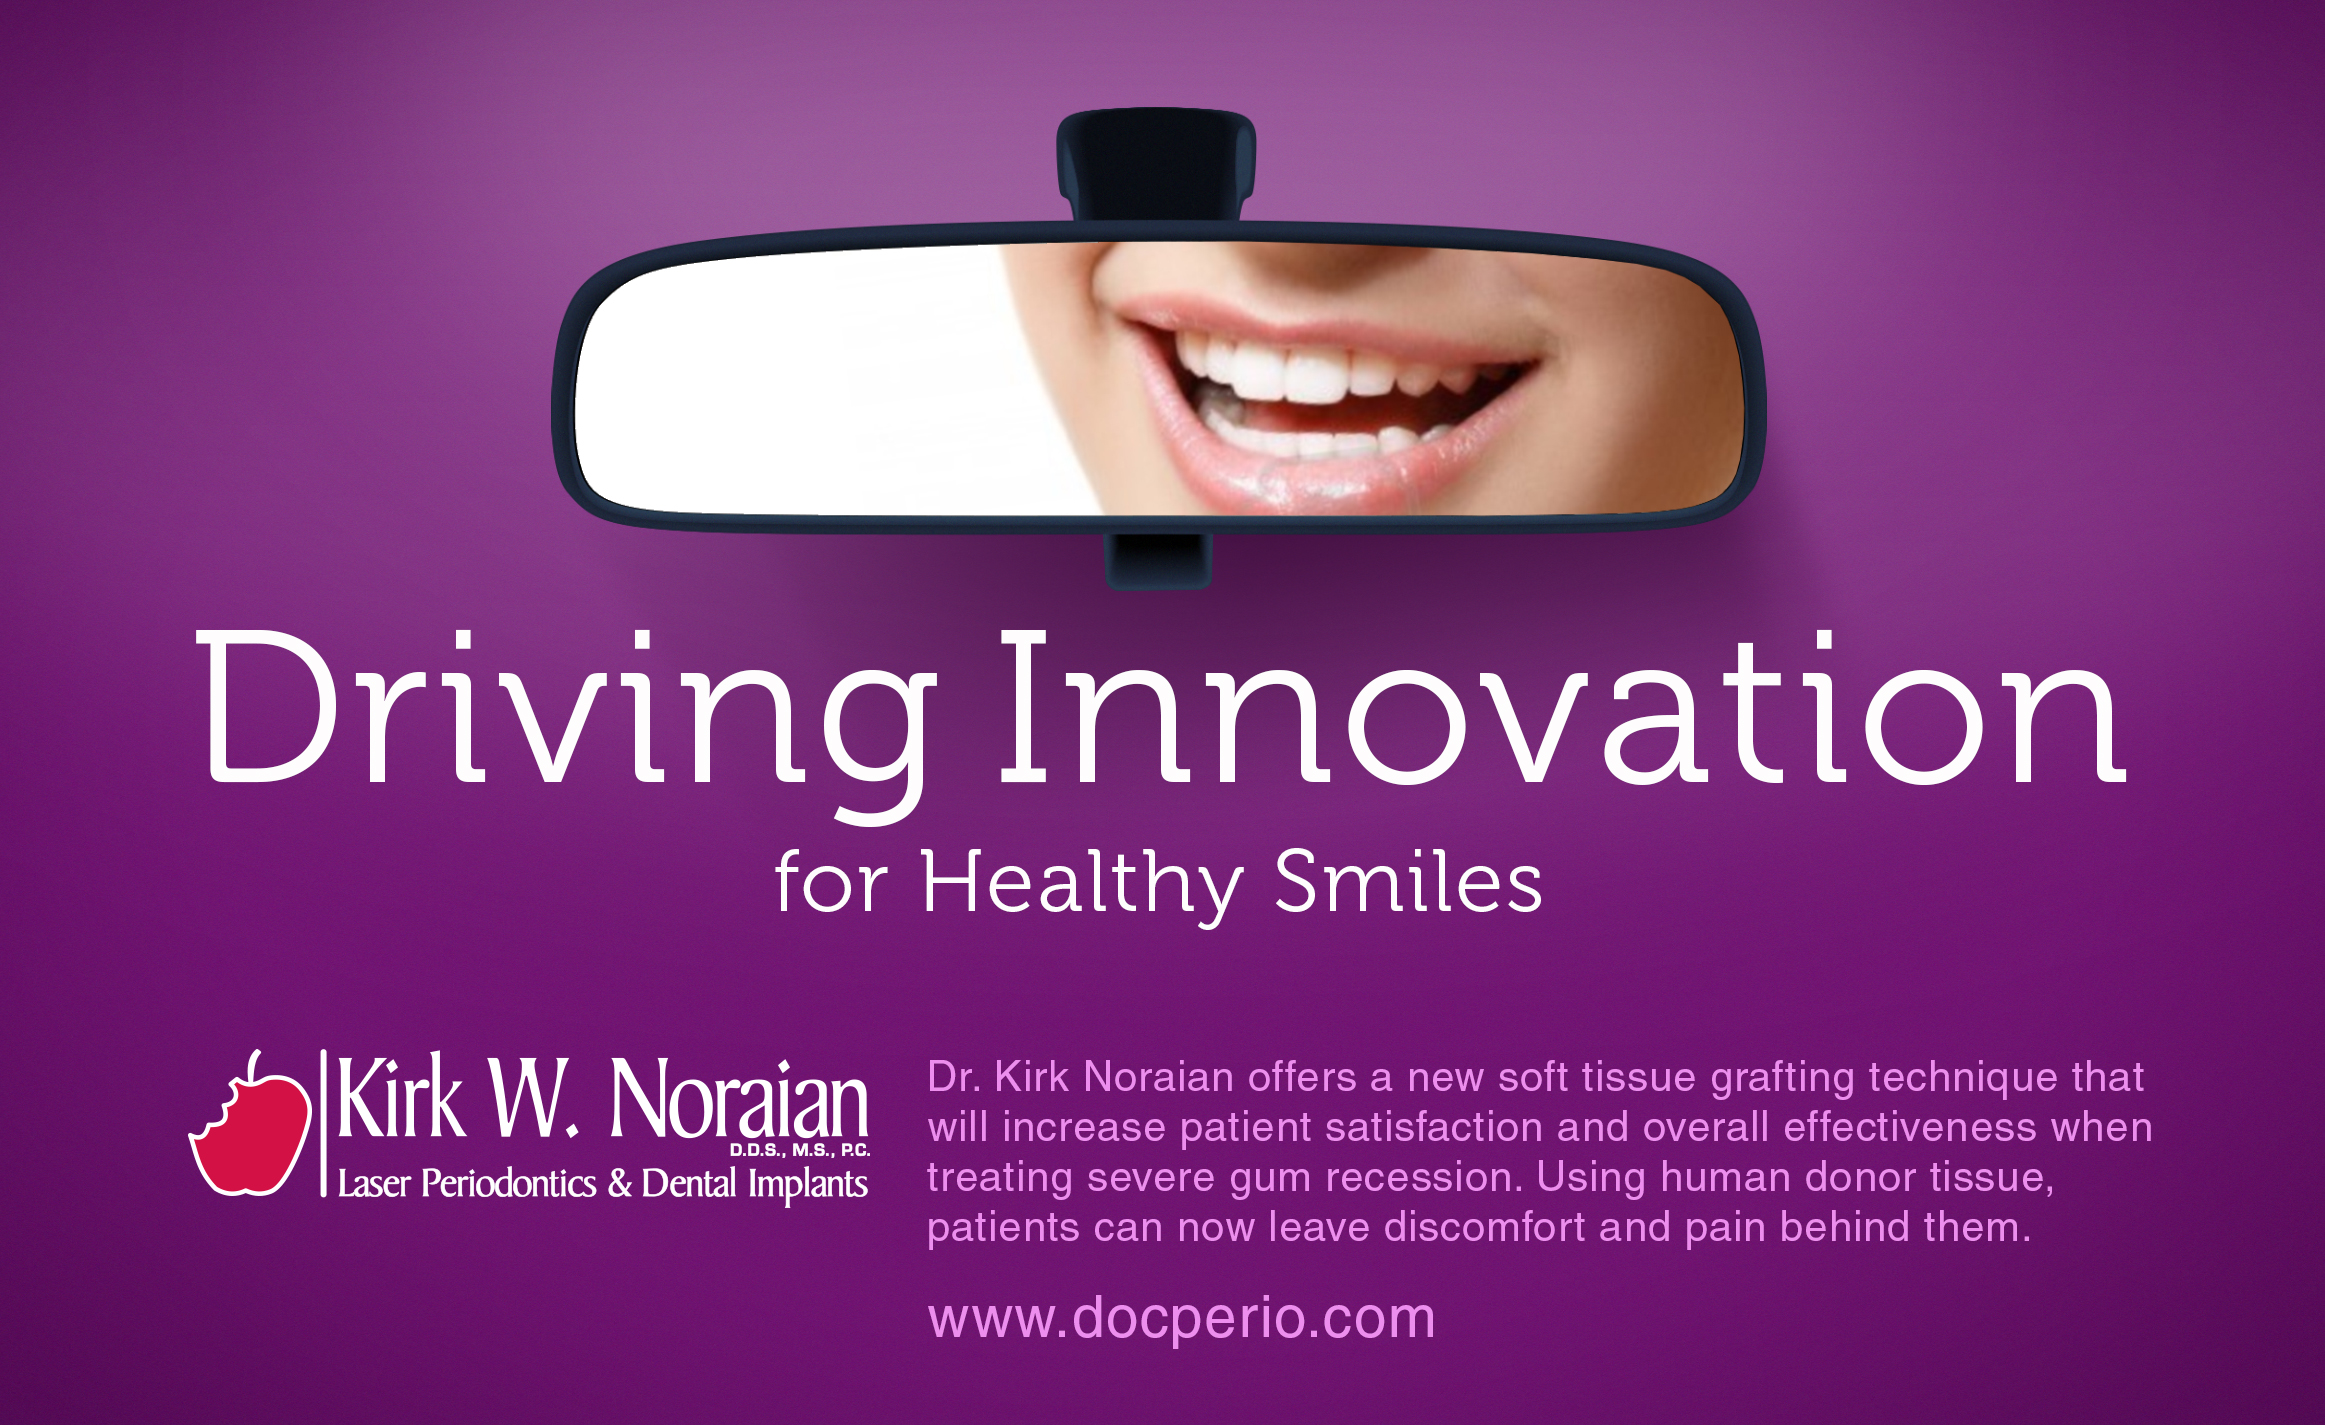 Dr. Noraian provides innovative soft tissue grafting procedures to increase patient satisfaction.